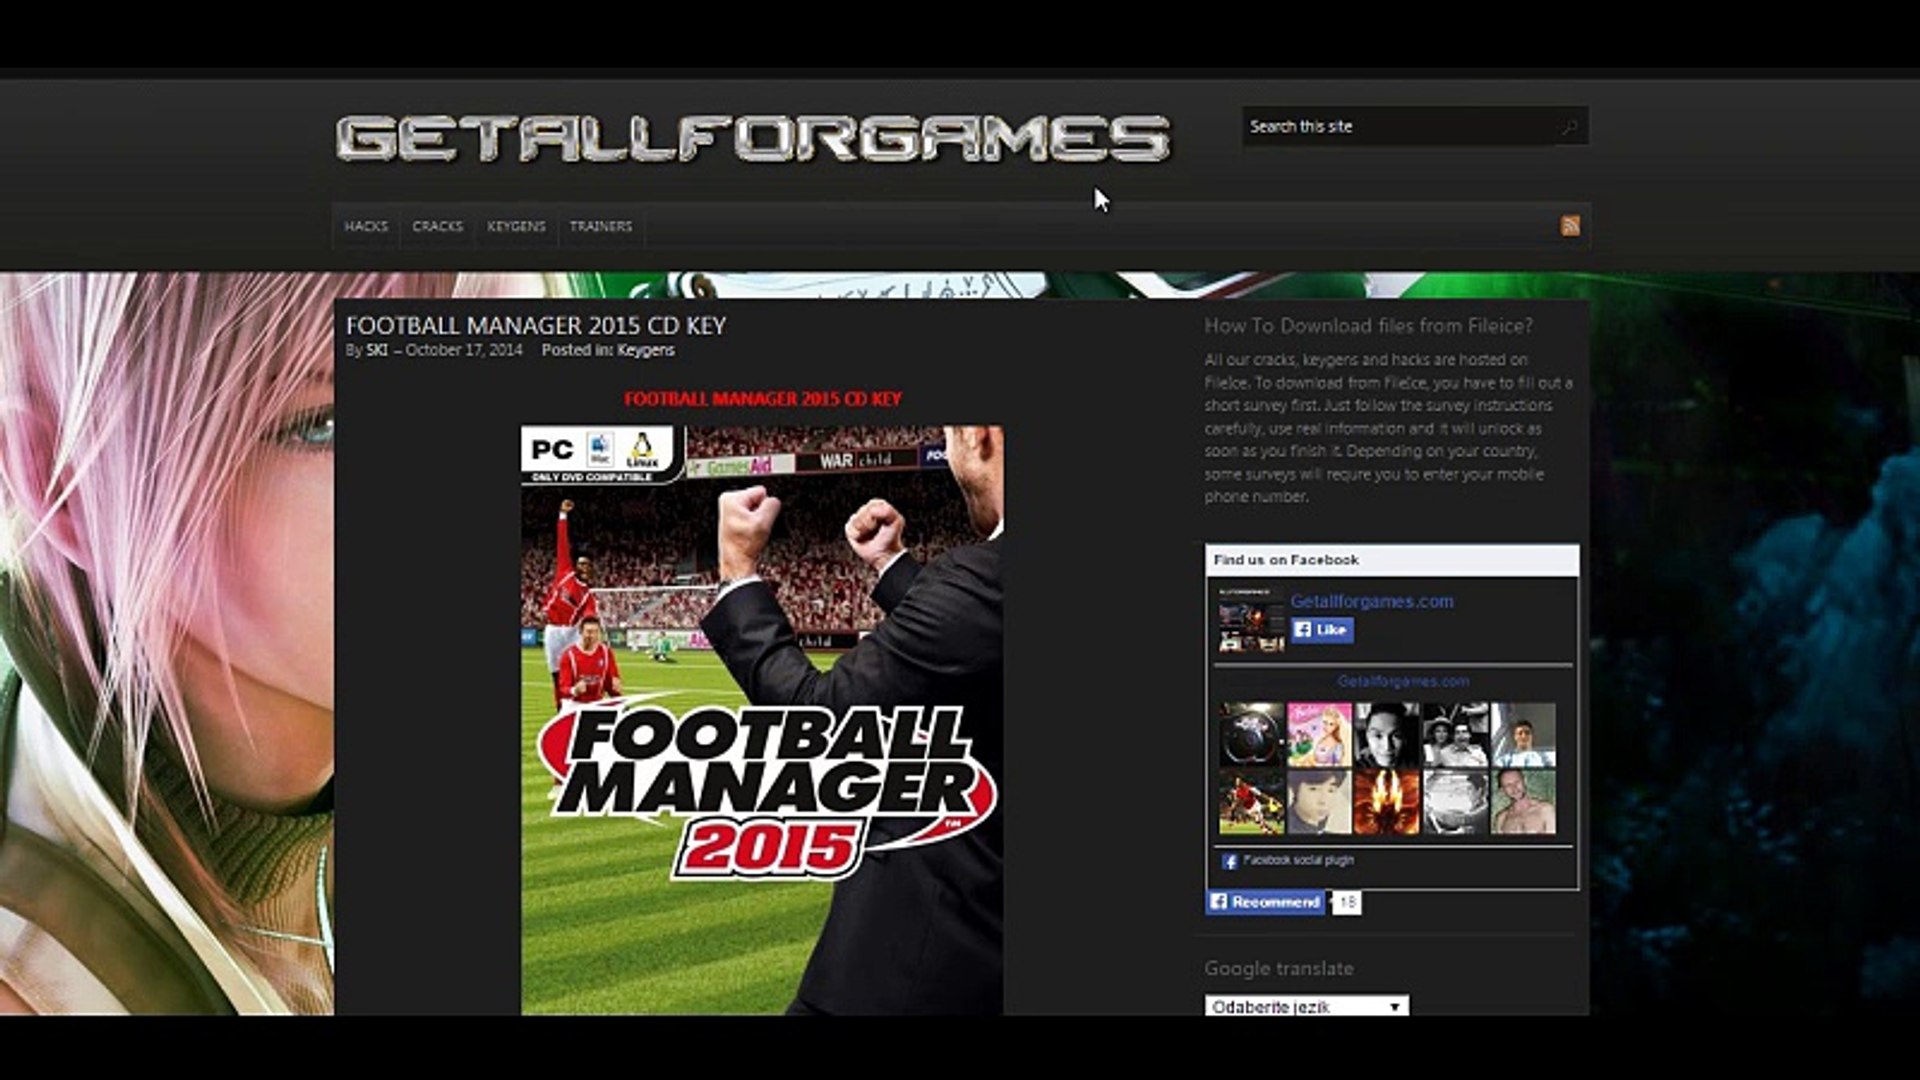 football manager 2016 serial key free